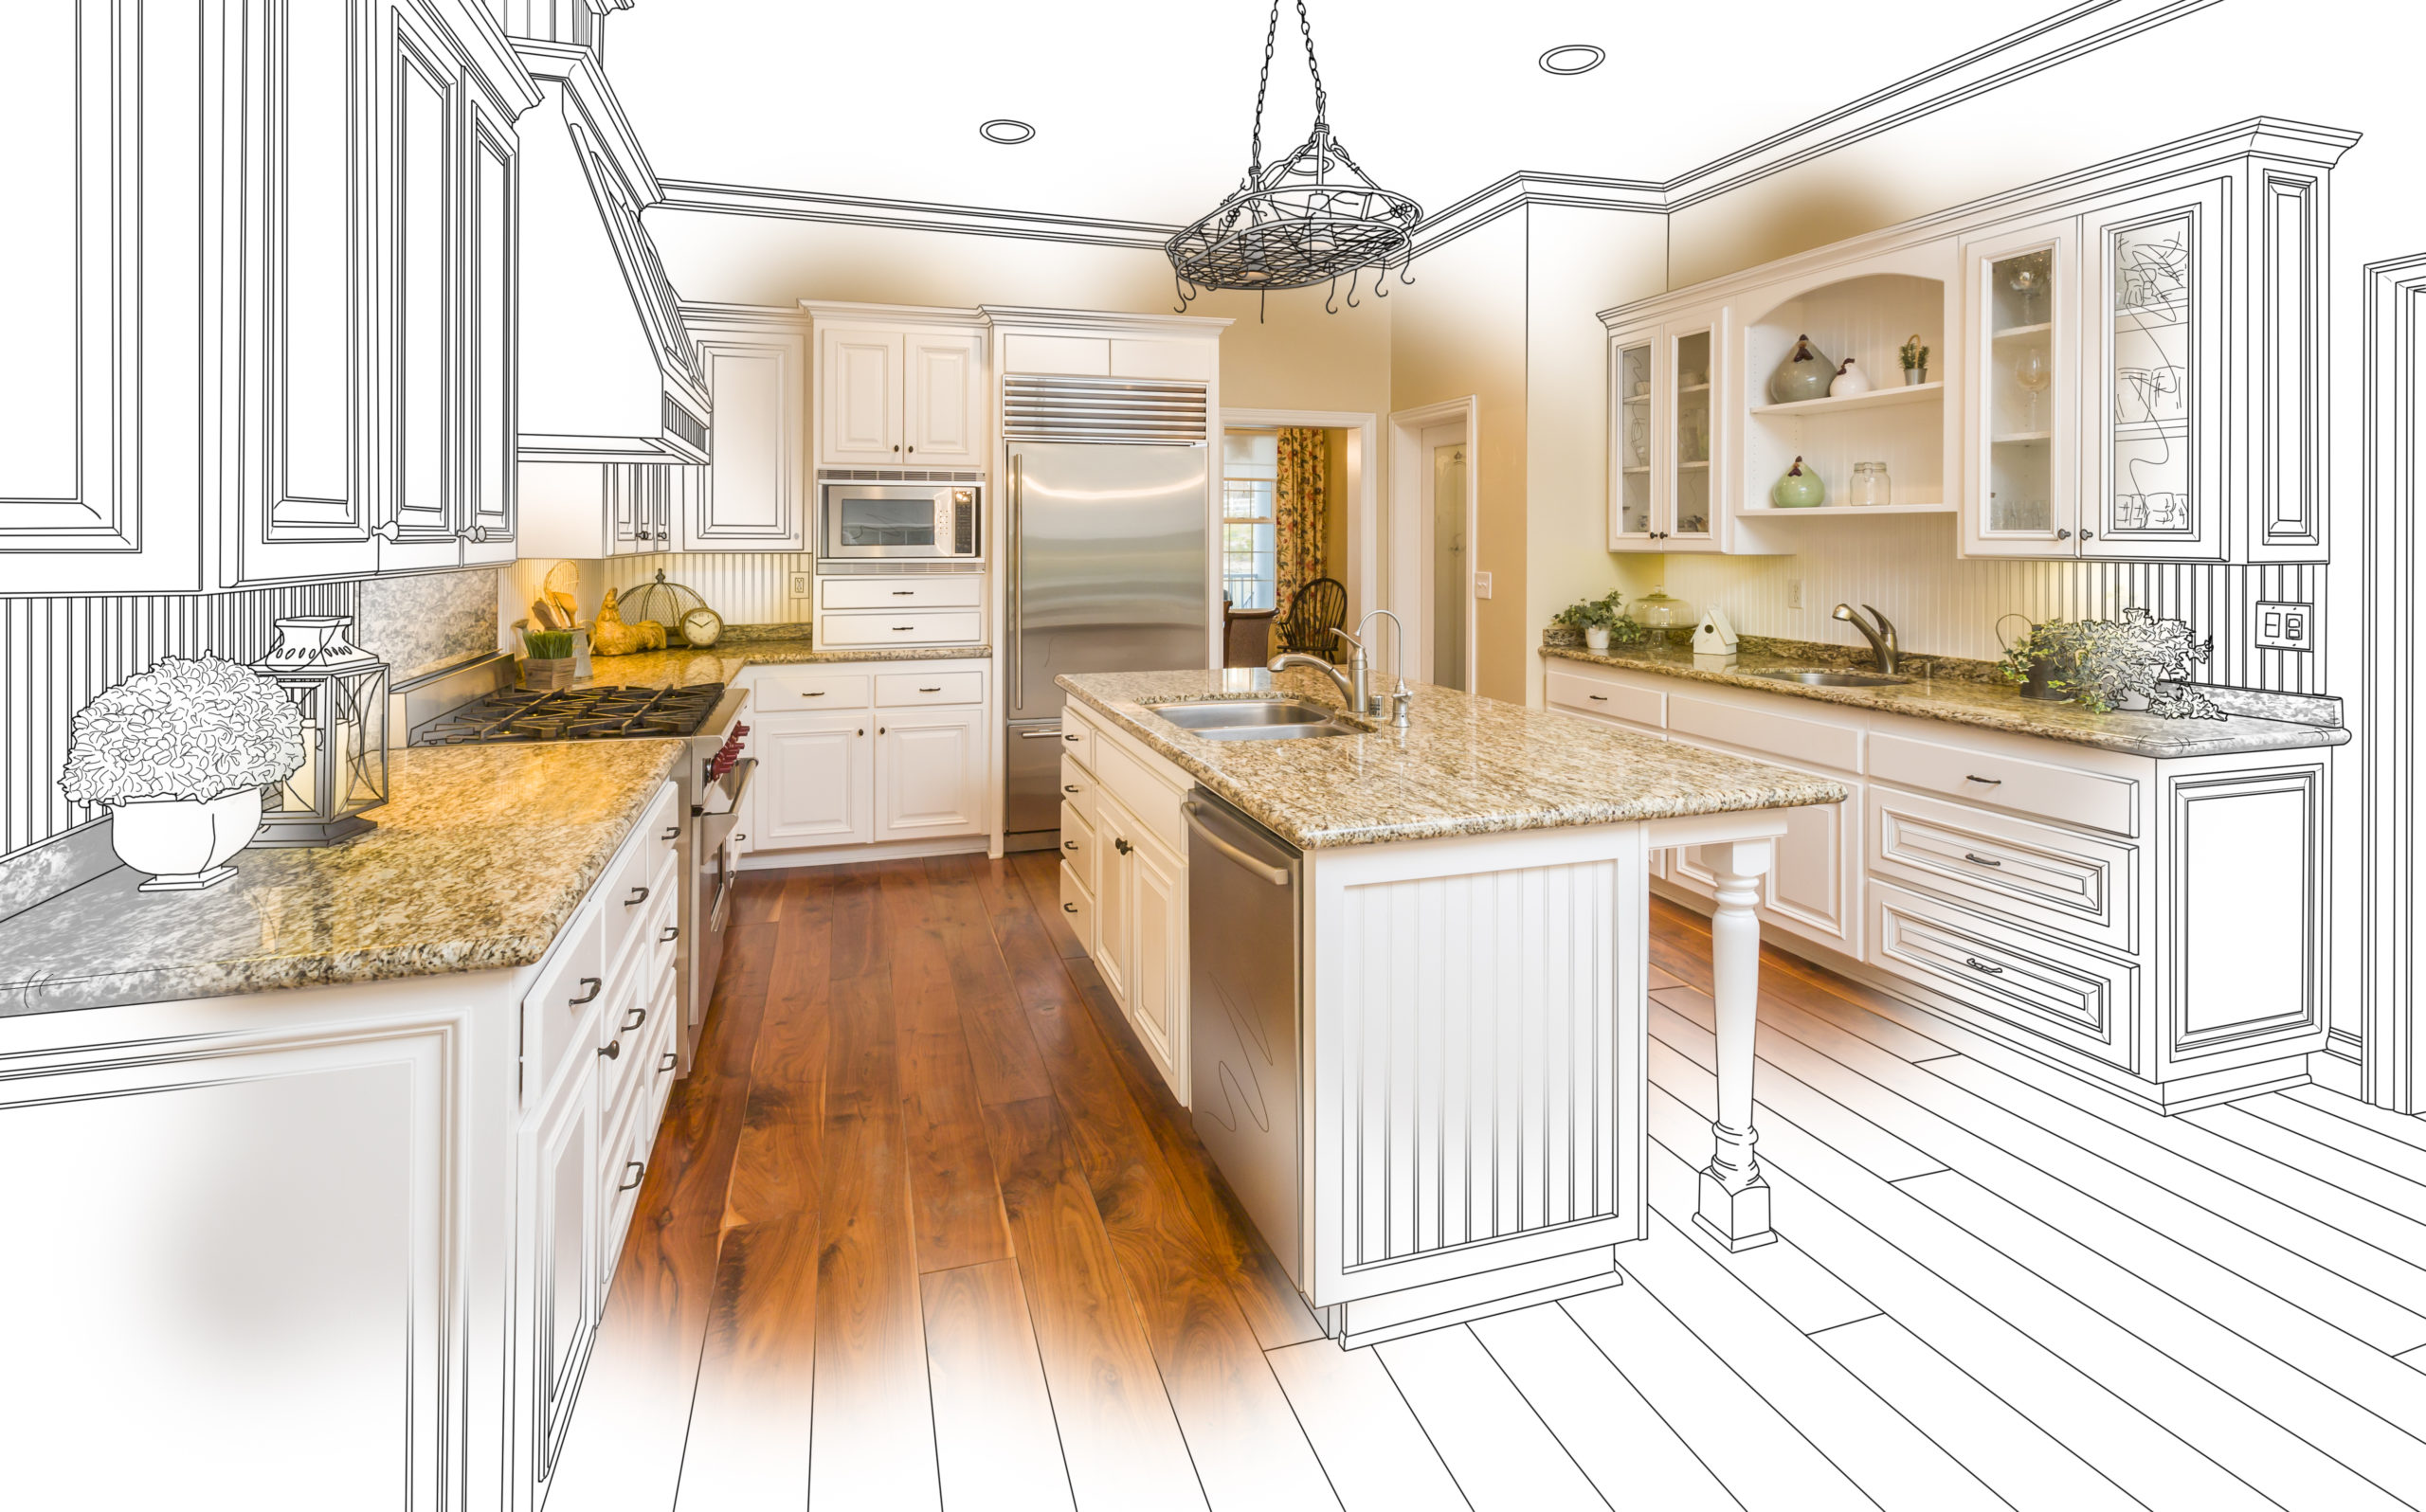 rule of designing a kitchen